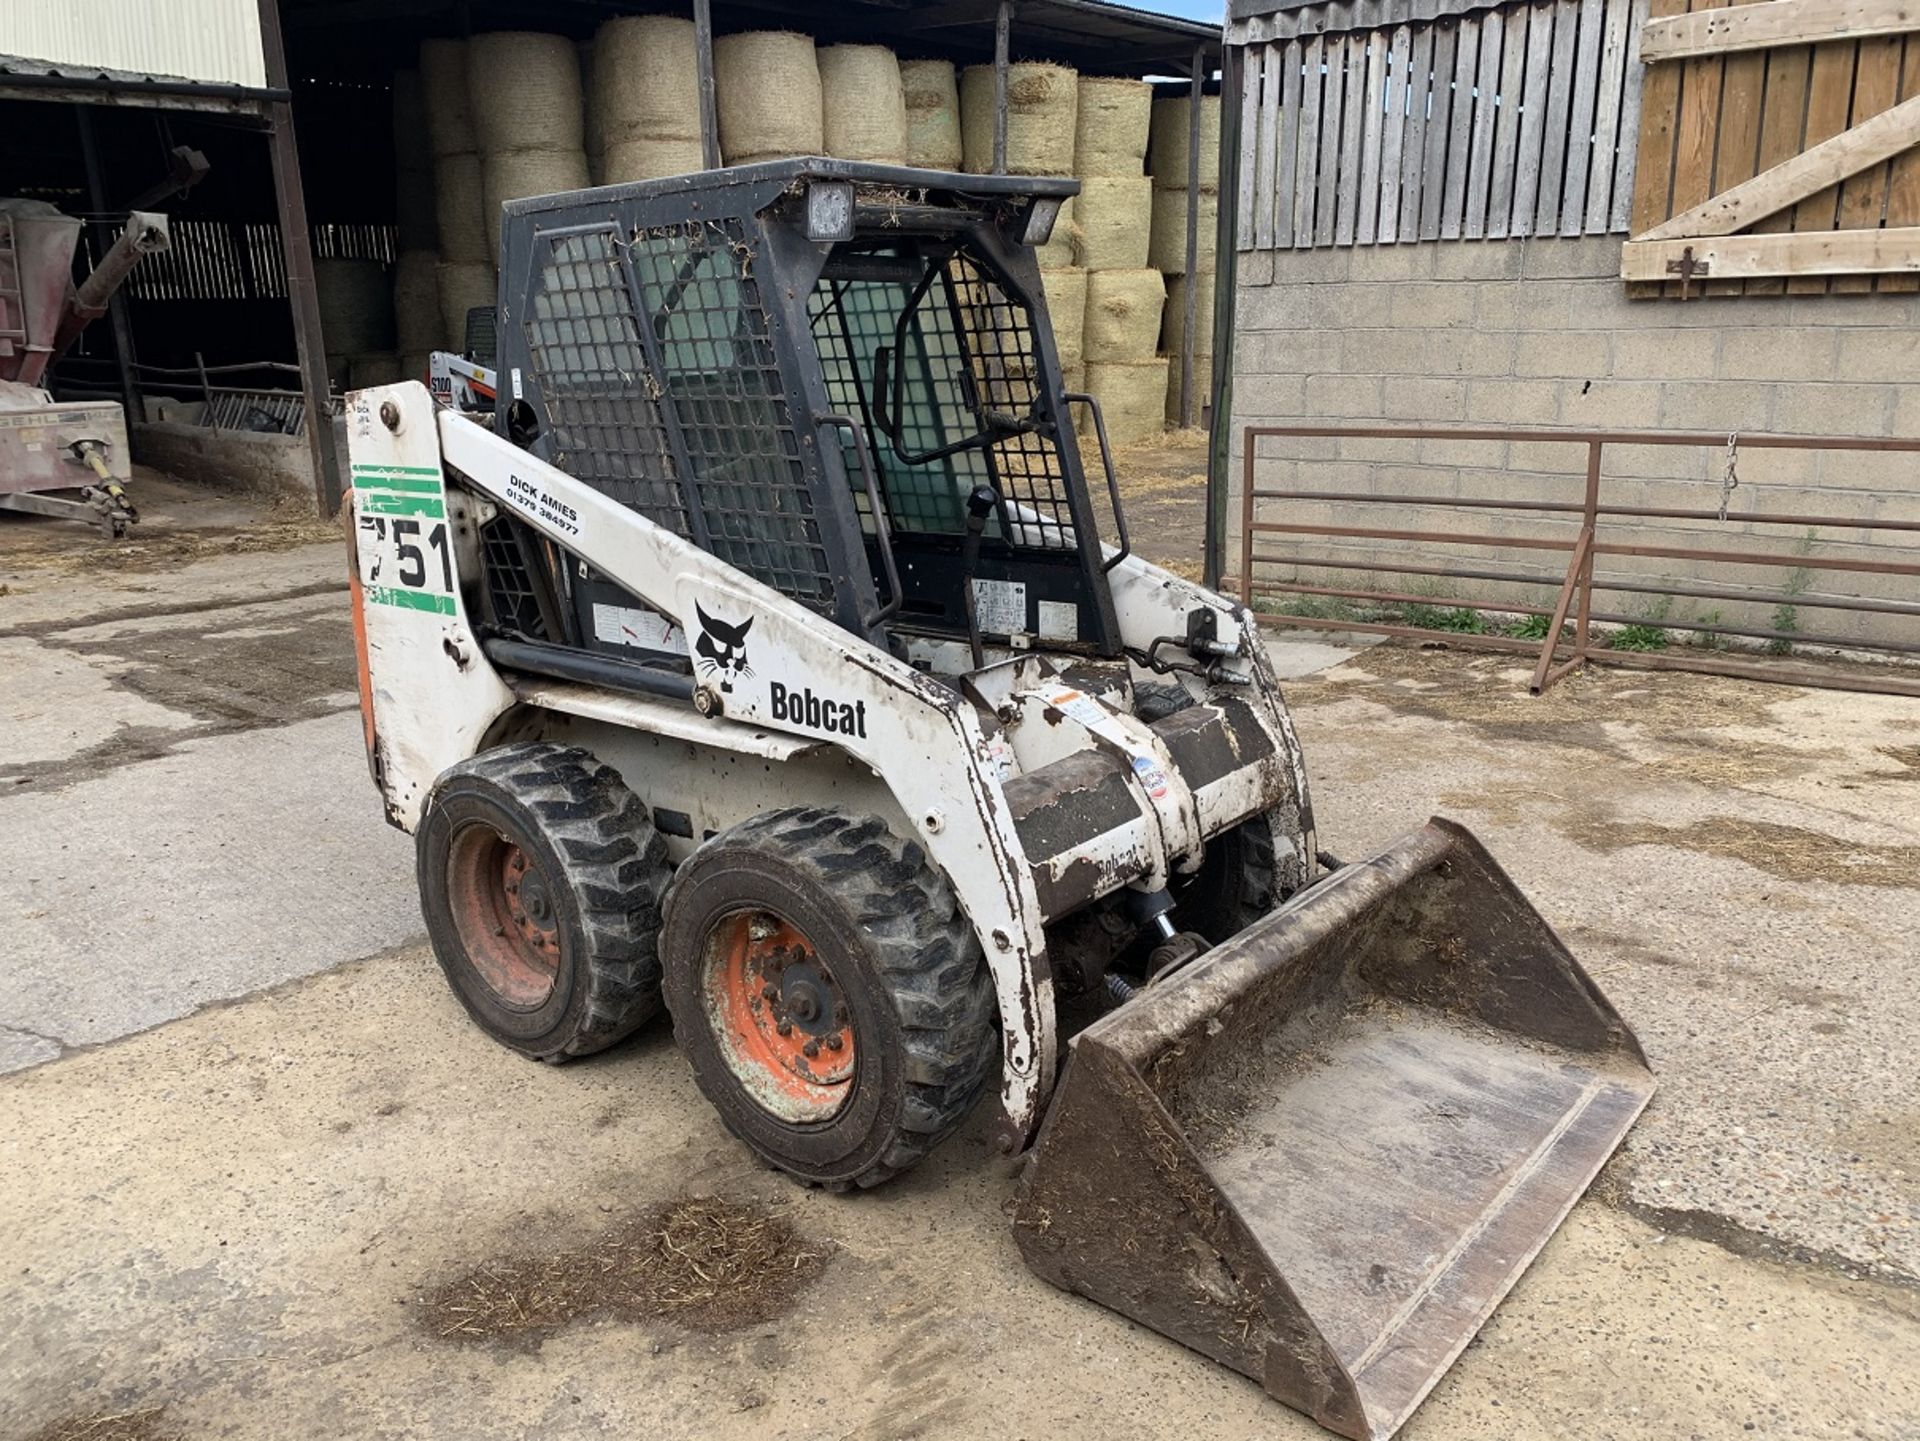 Bobcat 751 compact skid steer (1999), Rebuilt Engine in March 2020, Comes with Spare wheel,